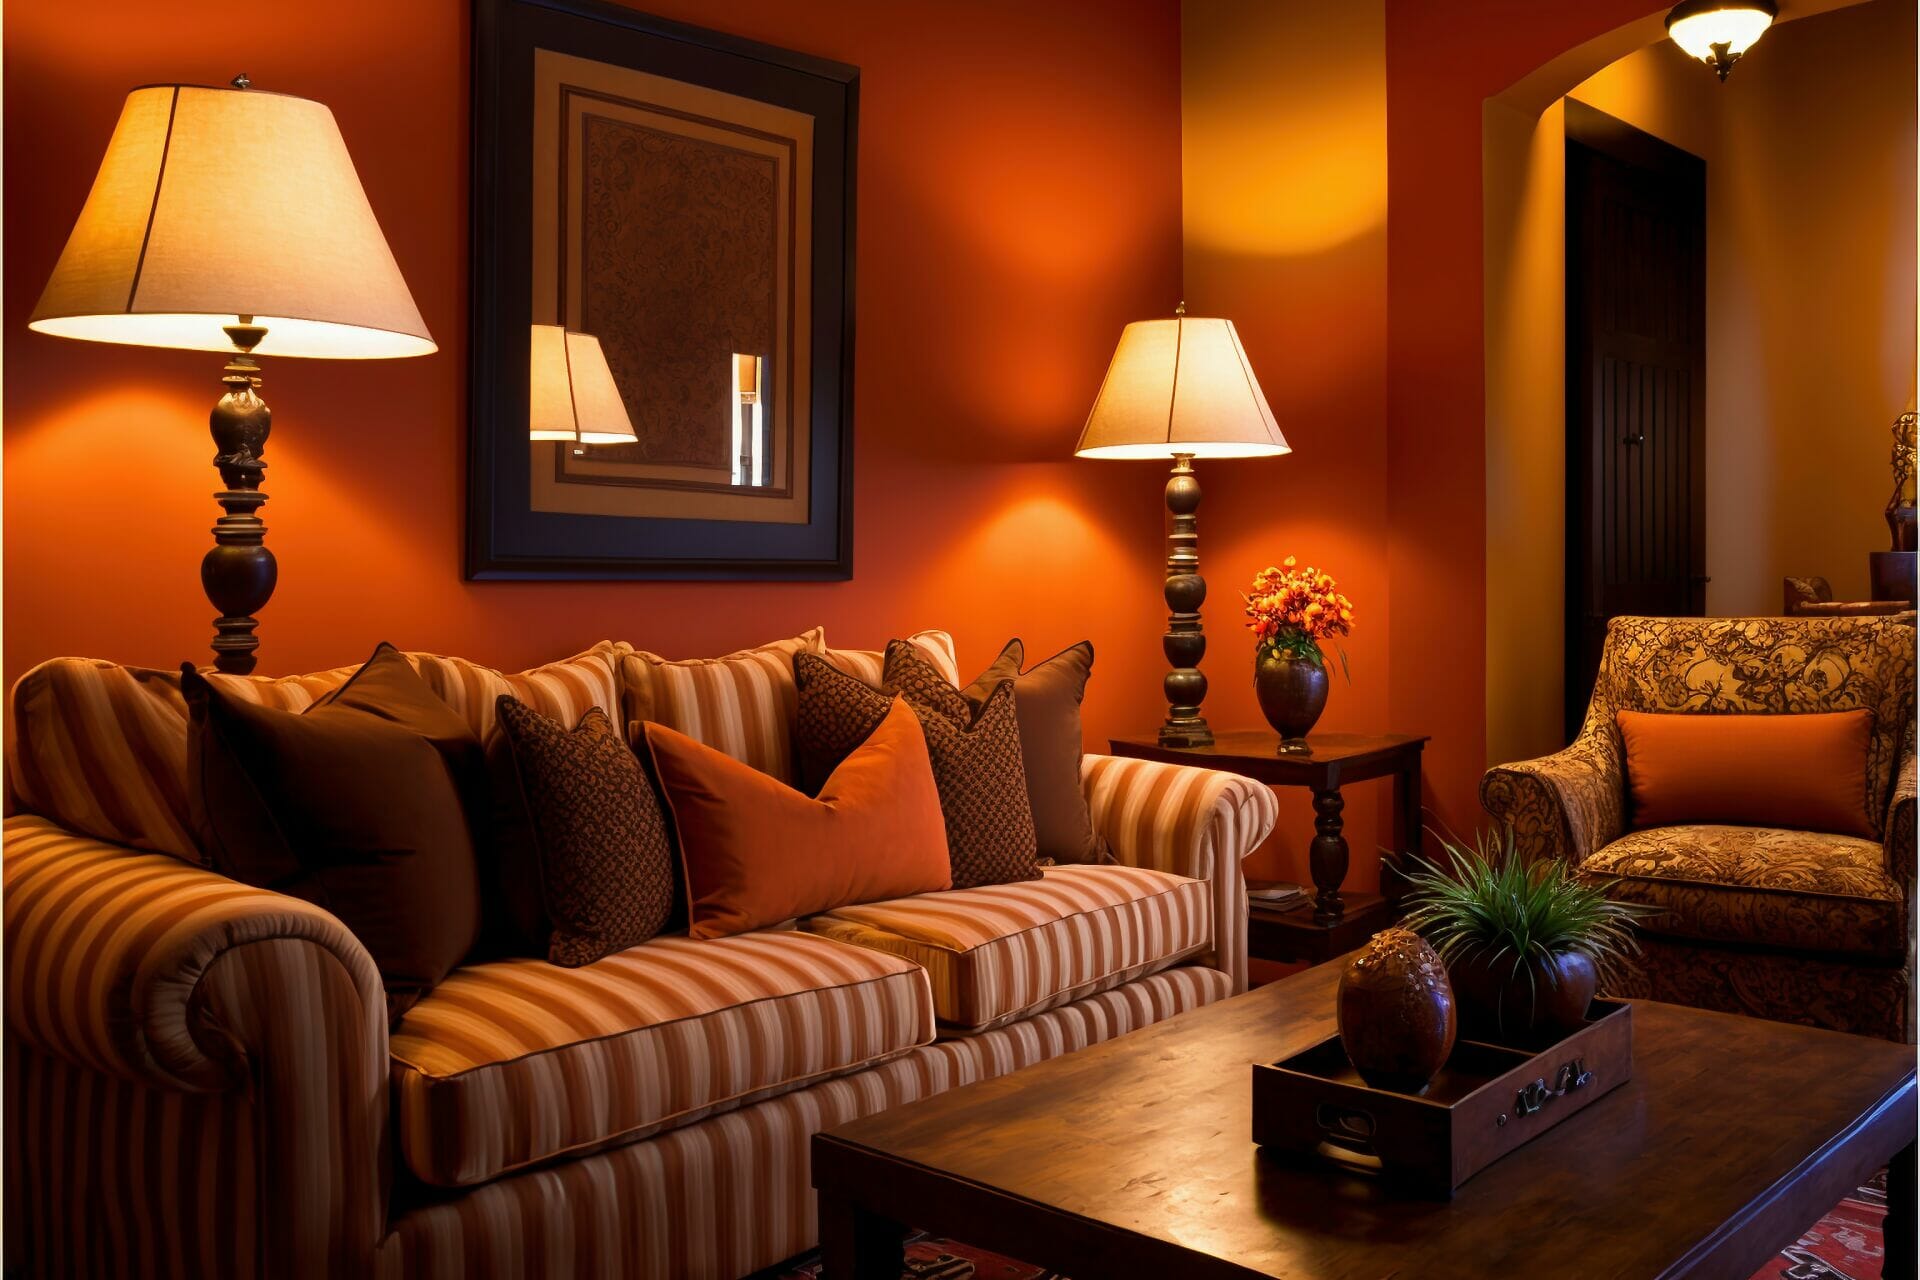 Living Room With Deep Orange Walls Illuminated By Led Lamps Upscale